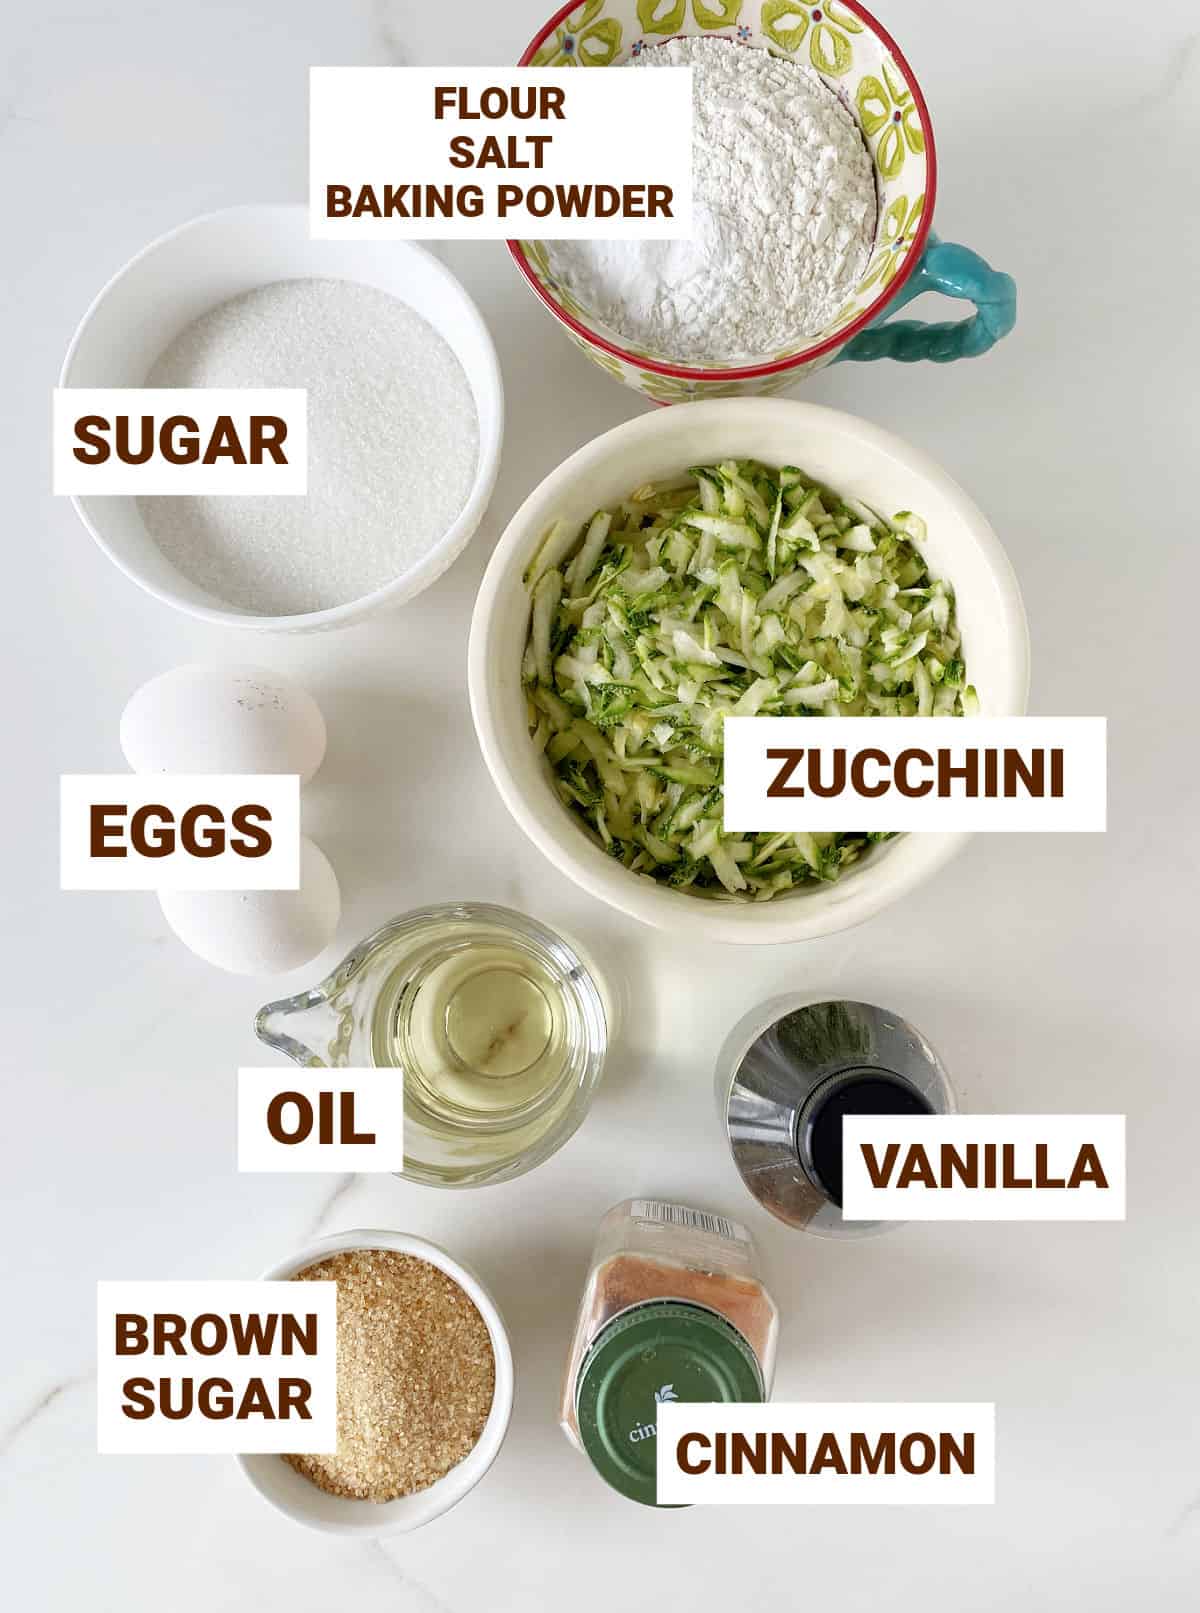 Bowls with zucchini cake ingredients on white surface, including cinnamon, vanilla, oil, brown sugar.